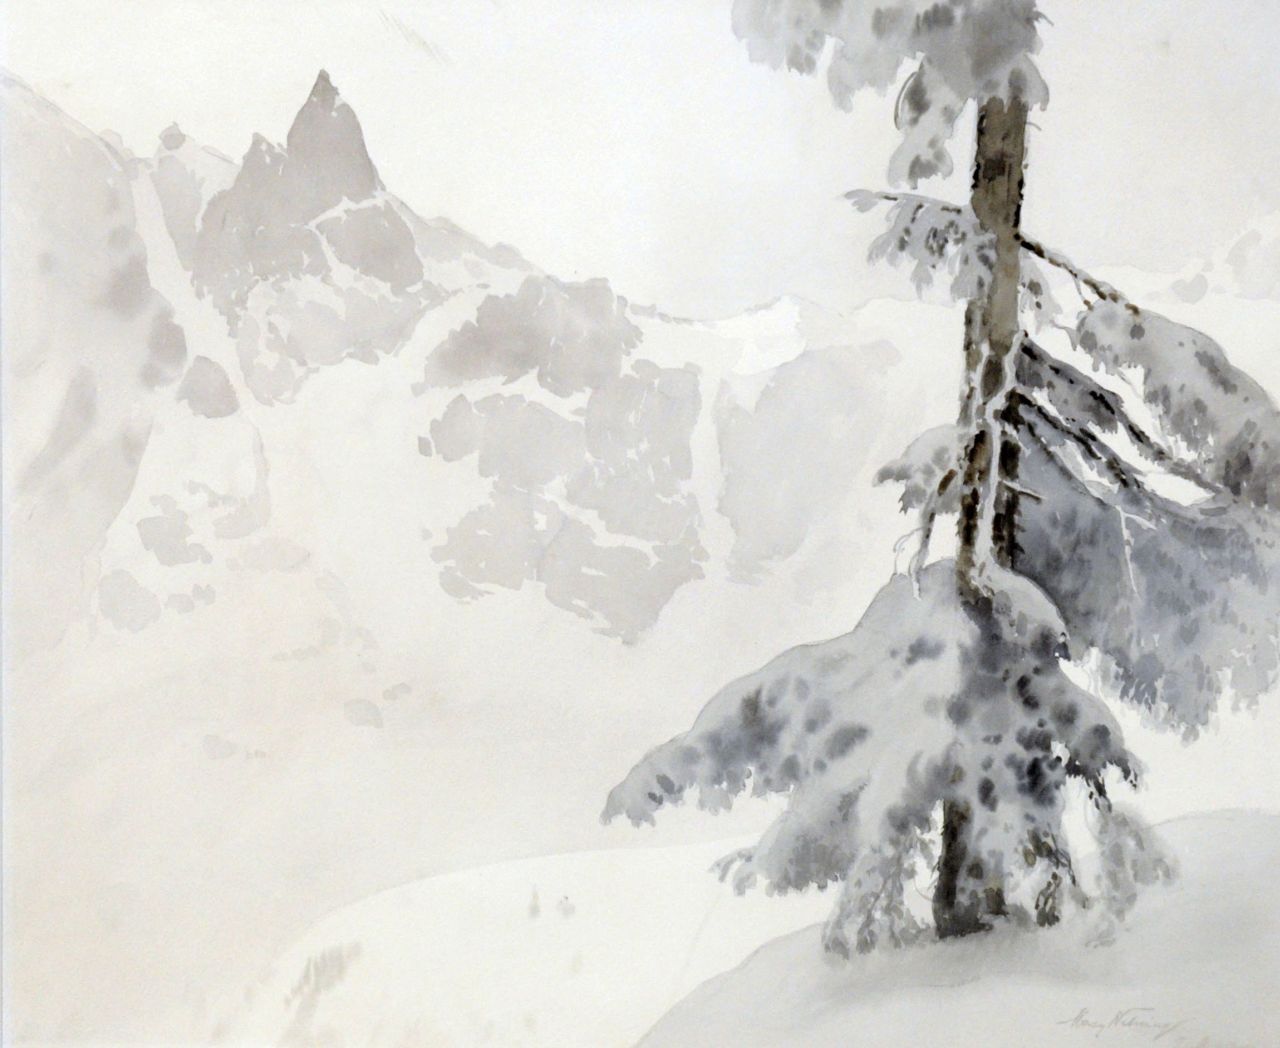 Nehring M.  | Maciej Nehring, Winter landscape, Poland, watercolour on paper 60.2 x 72.5 cm, signed l.r. (indistinctly)